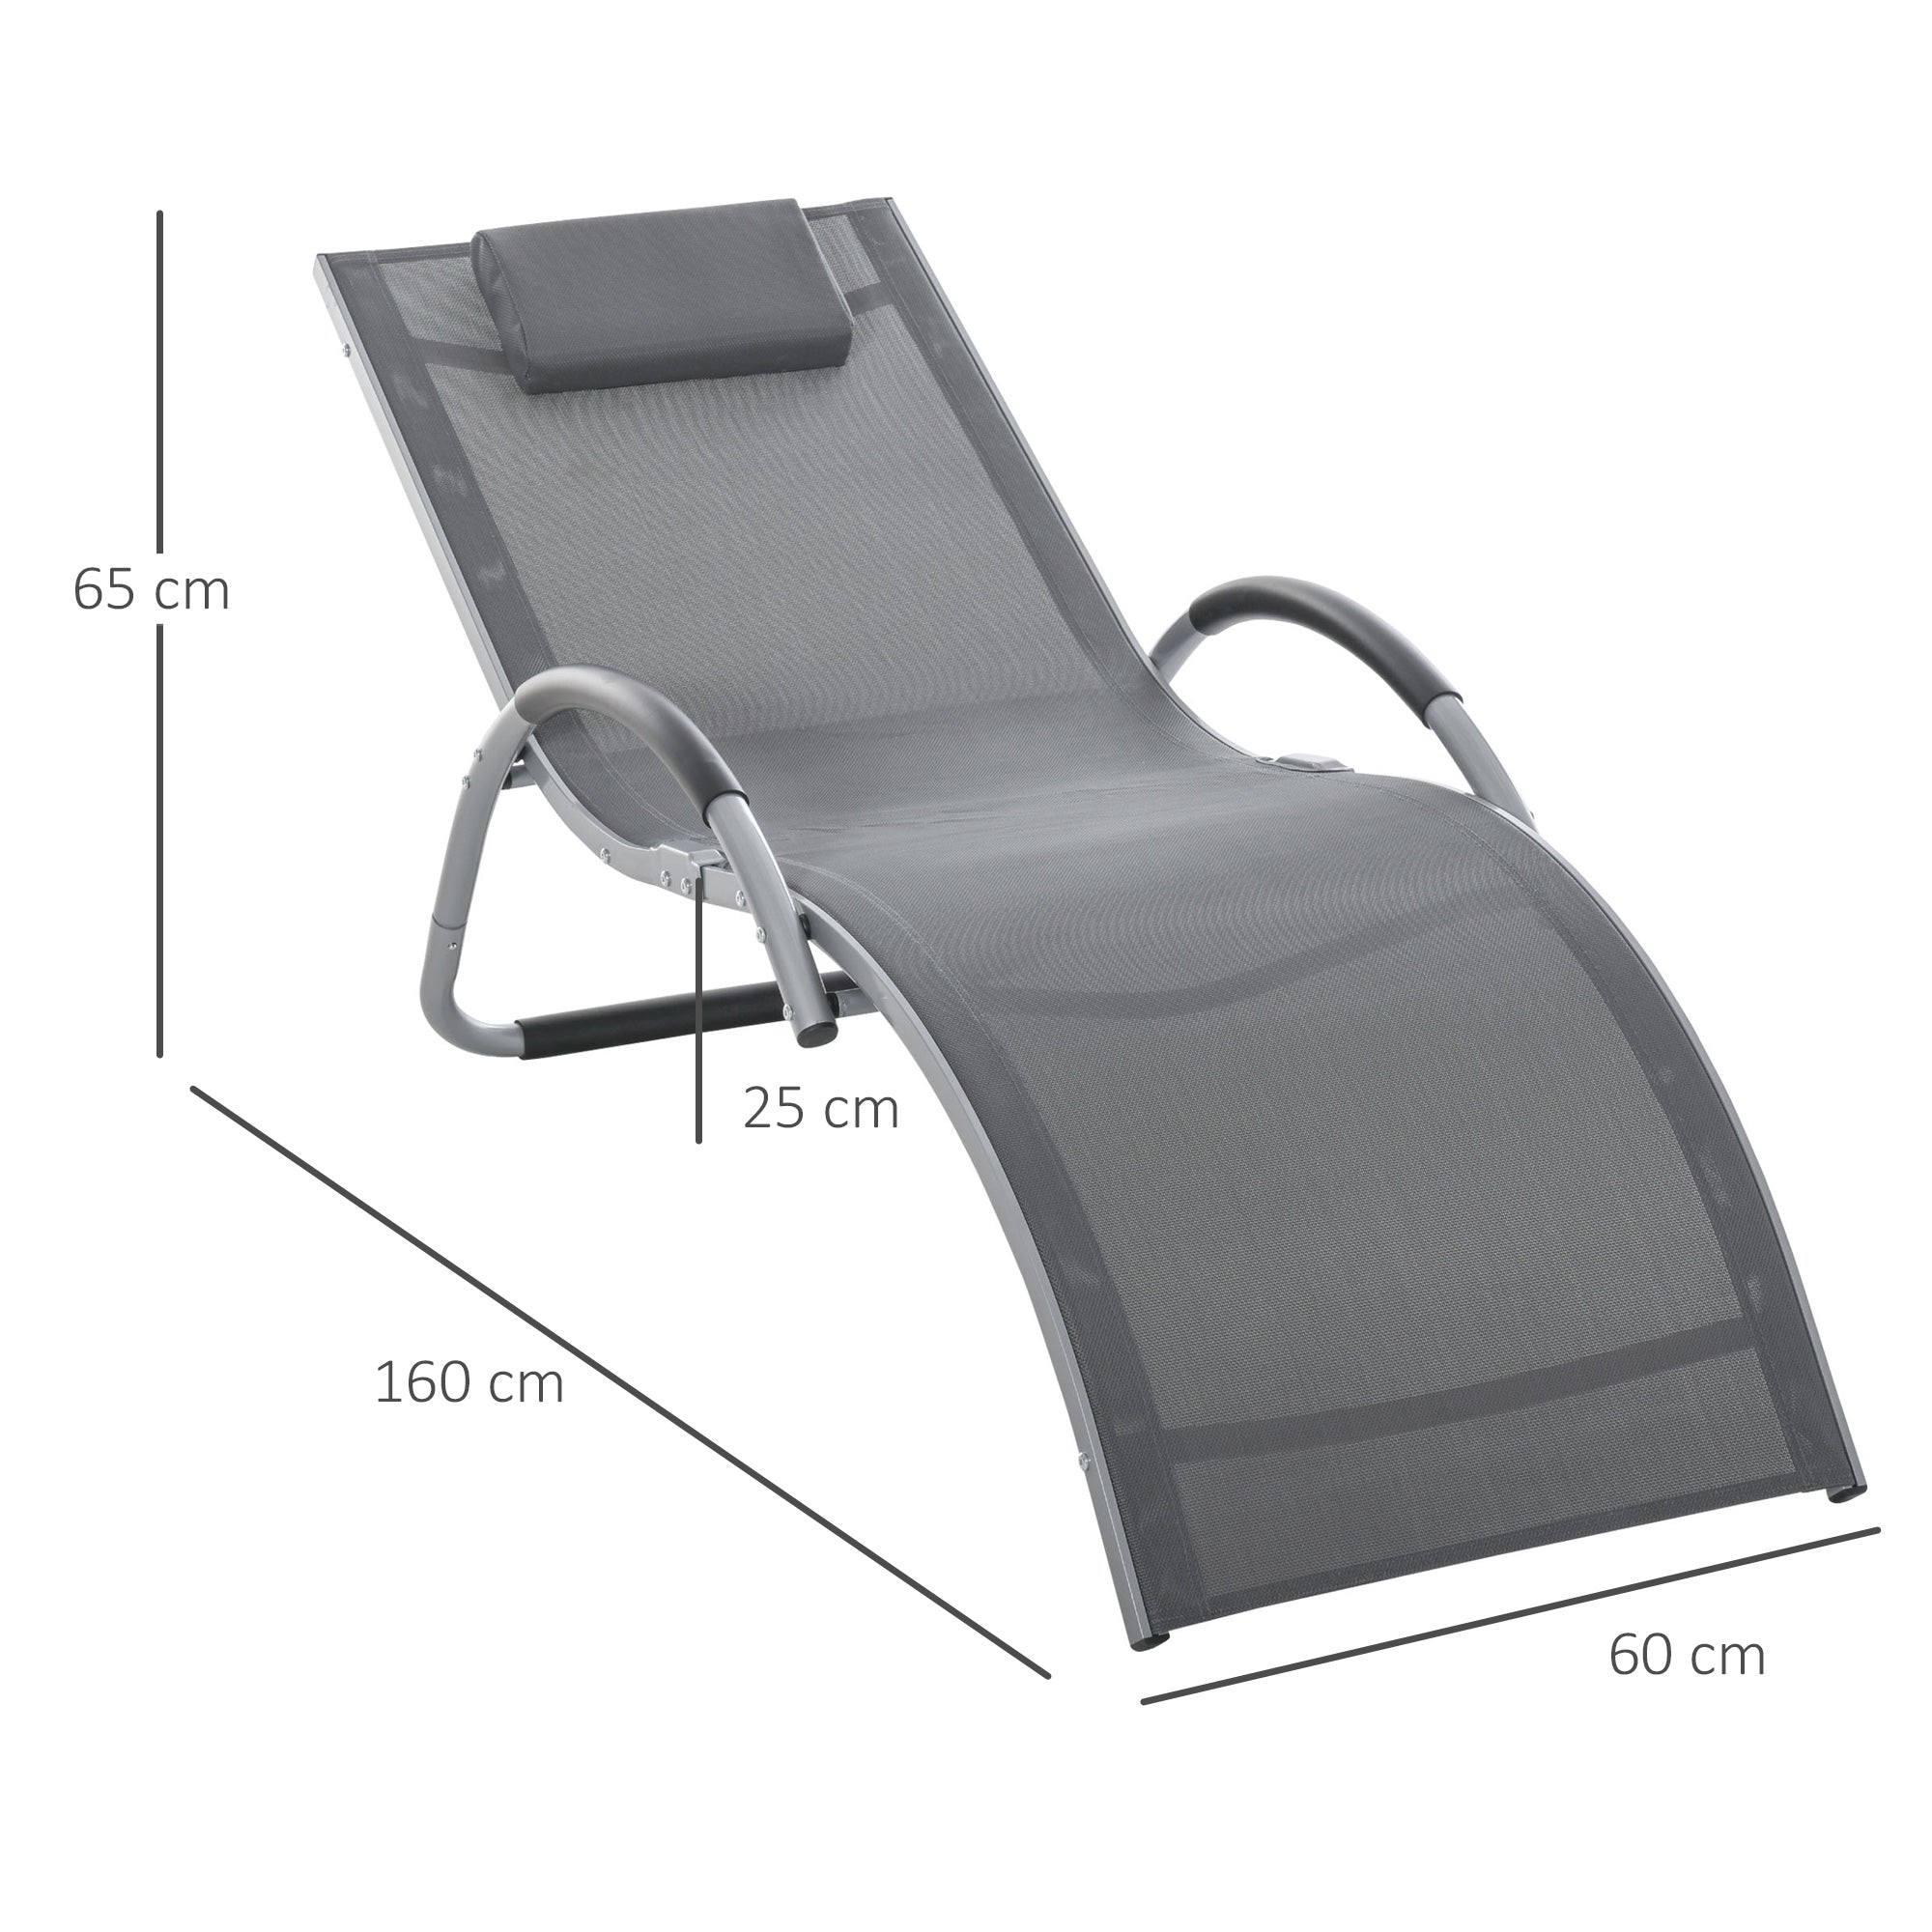 Outsunny Ergonomic Lounger Chair Portable Armchair with Removable Headrest Pillow for Garden Patio Outside All Aluminium Frame Dark Grey - Inspirely